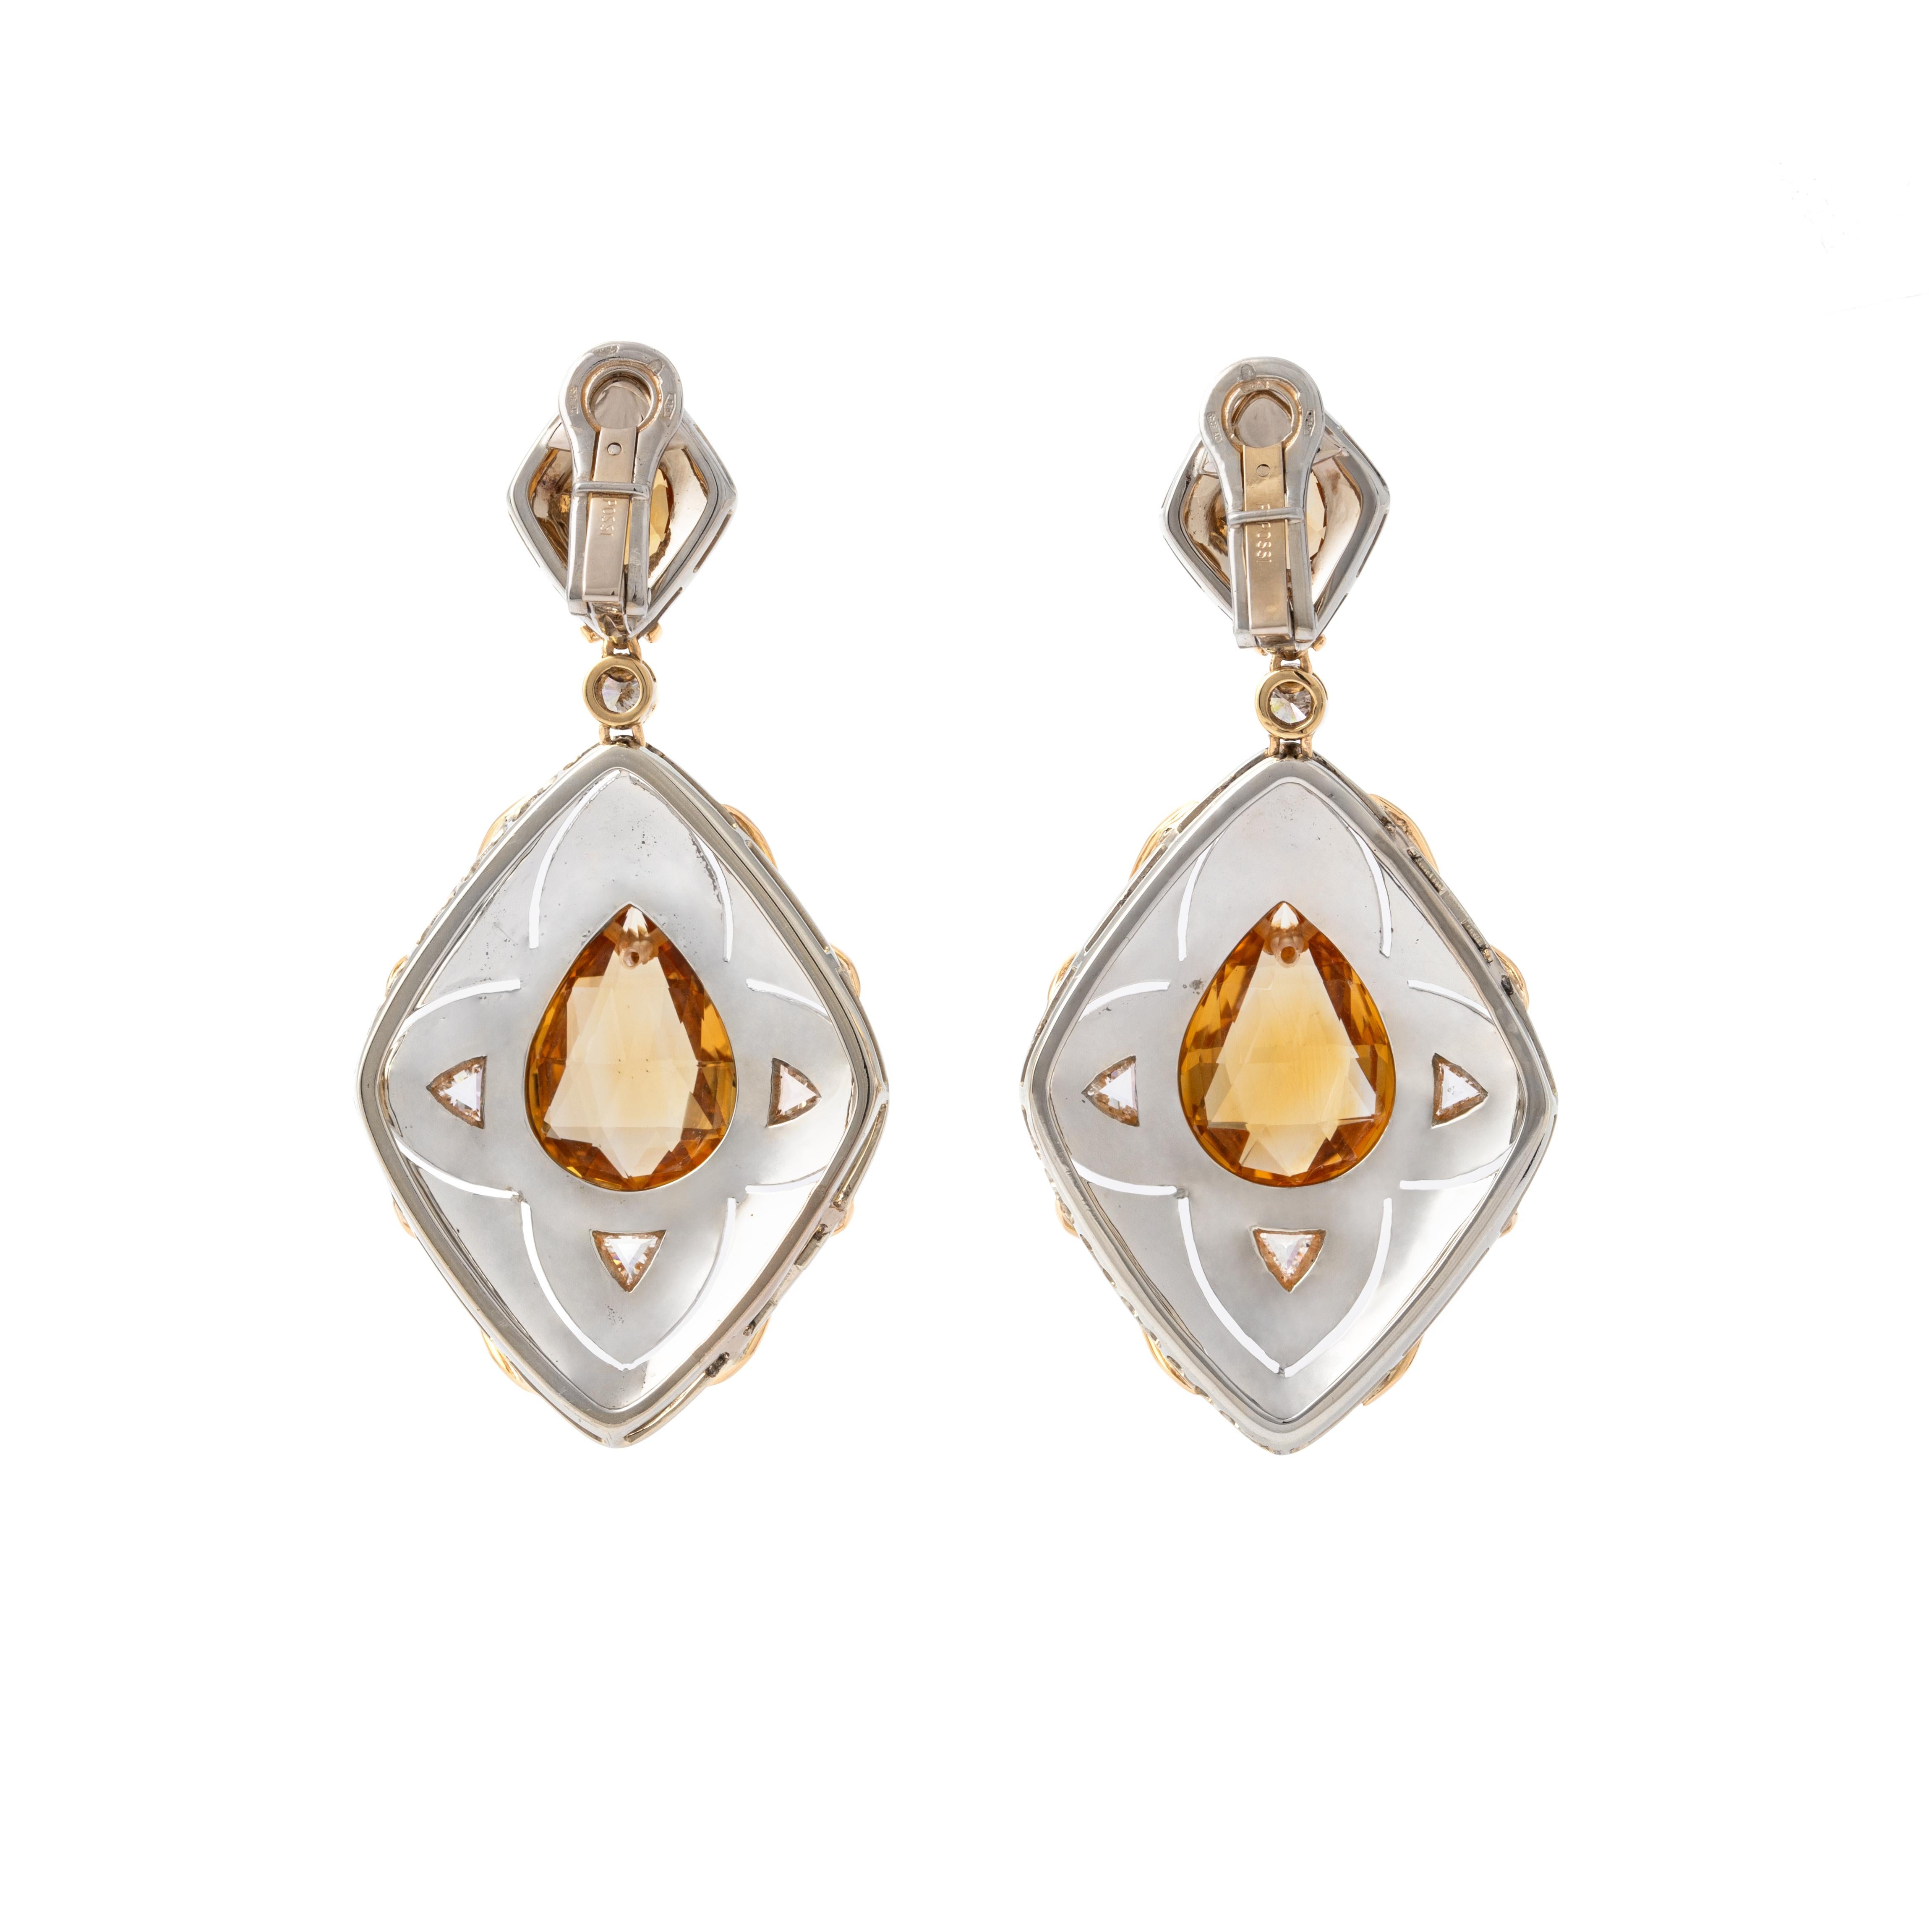 Repossi. Citrine and Diamond white and yellow gold 18K ear pendants. Late 20th century.

Total length: approx. 6.50 centimeters.
Total width: 4.10 centimeters.
Total weight: 42.12 grams.
